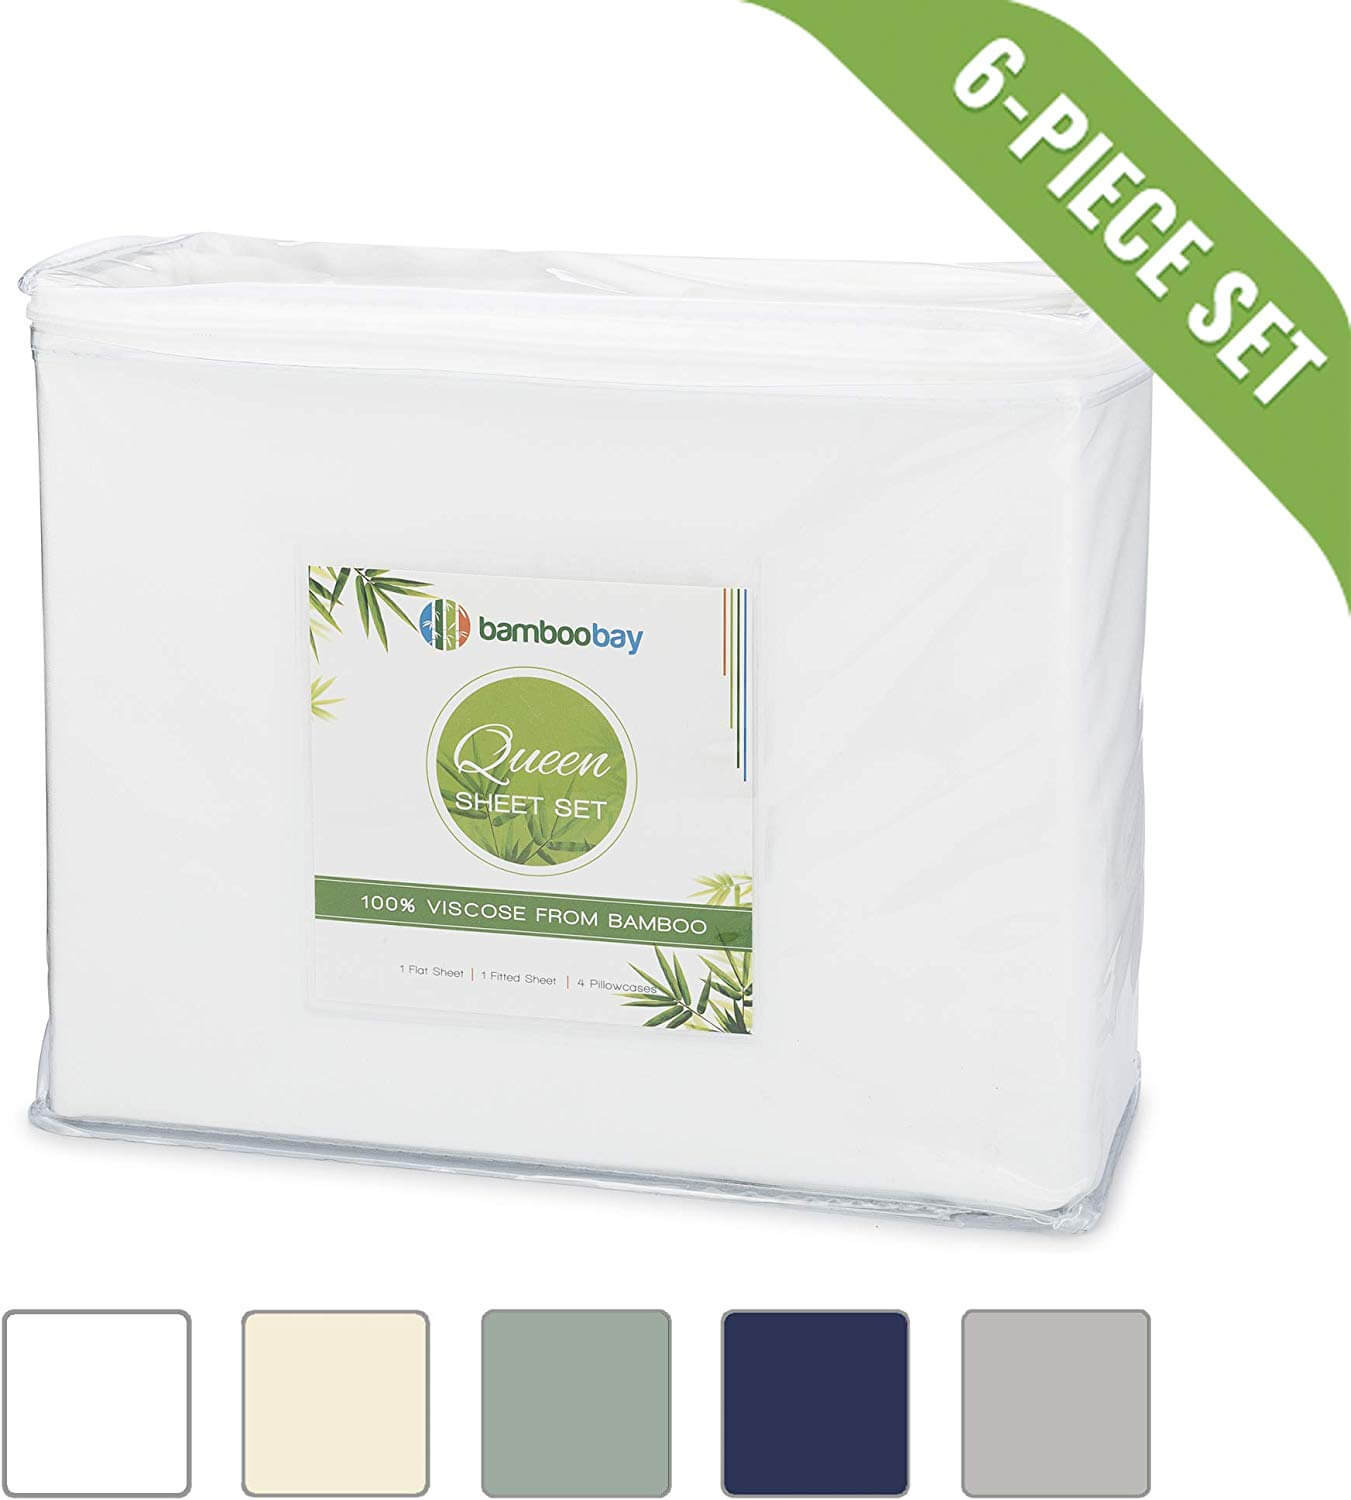 Bamboo Bay 100% Viscose from Bamboo Sheets - Hypoallergenic and Organic 6-Piece Bamboo Sheet Set - Extra Deep Pocket, No-Slip Fitted Sheet - Soft, Cool, and Durable (Queen, White)